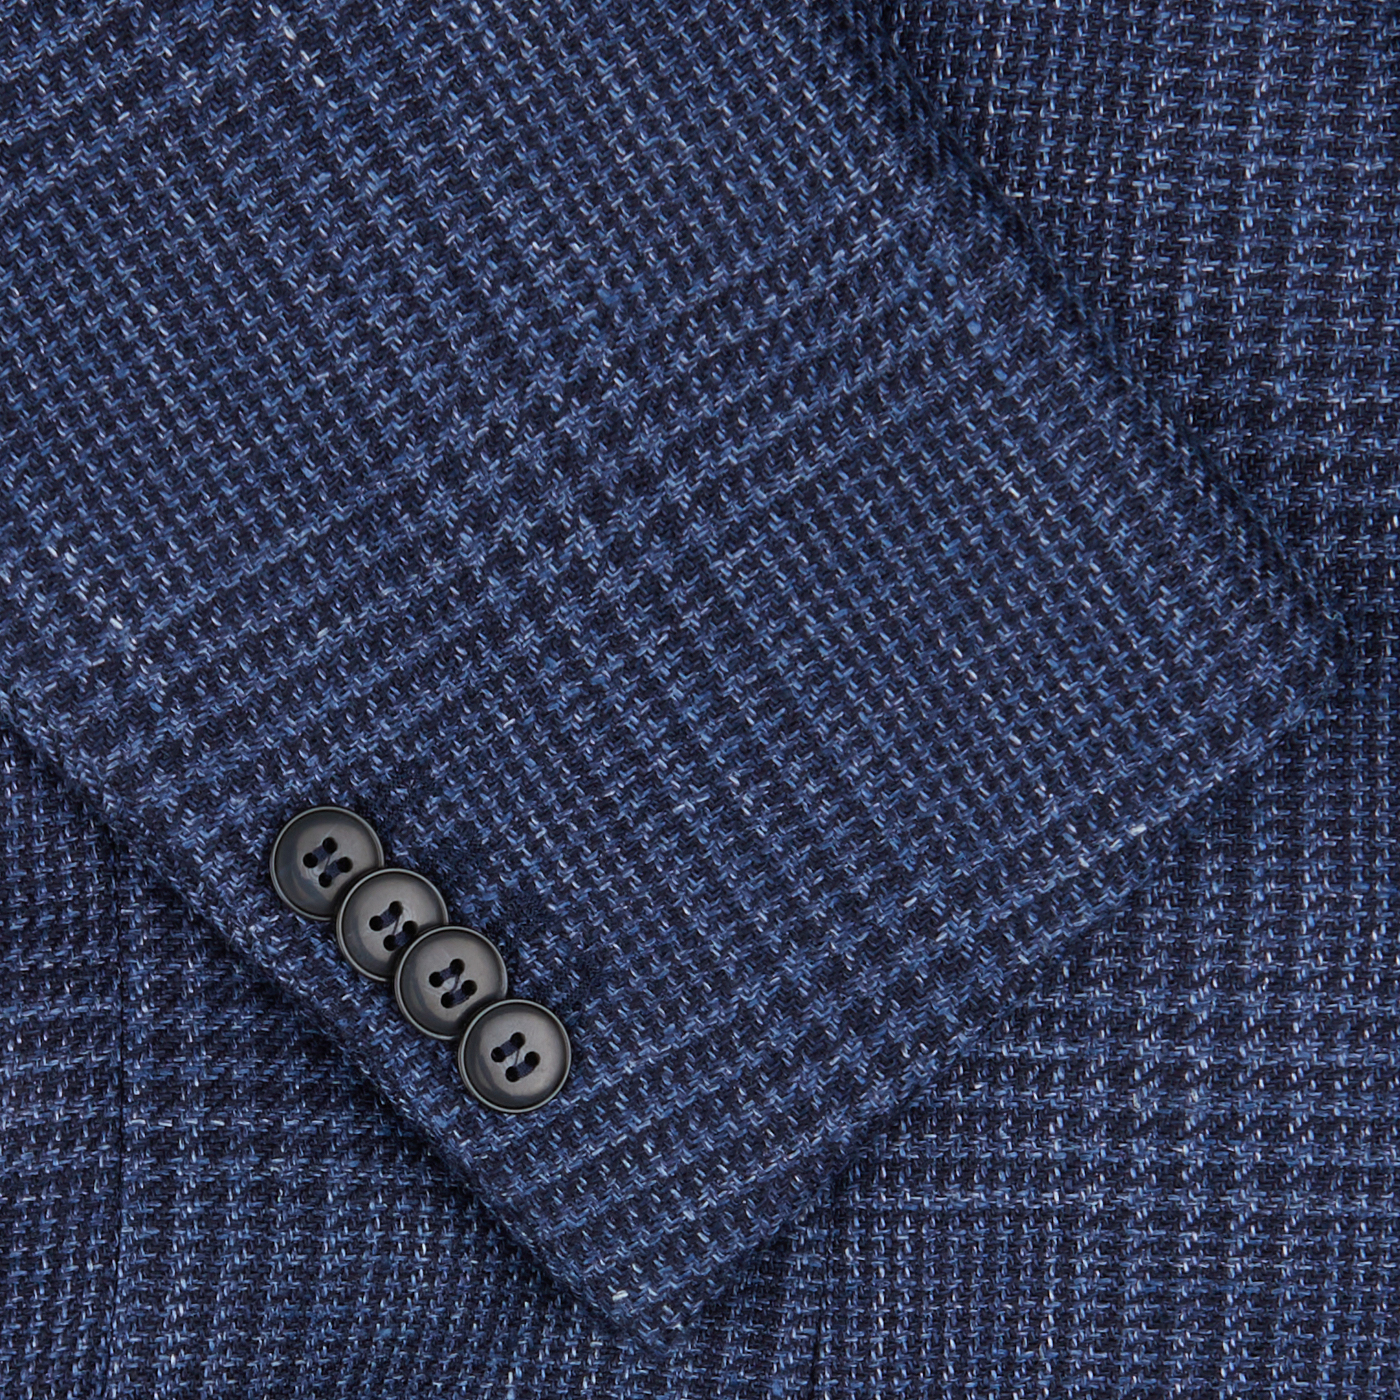 Close-up of a Studio 73 Dark Blue Checked Wool Linen Blazer fabric with a herringbone pattern and a row of buttons.